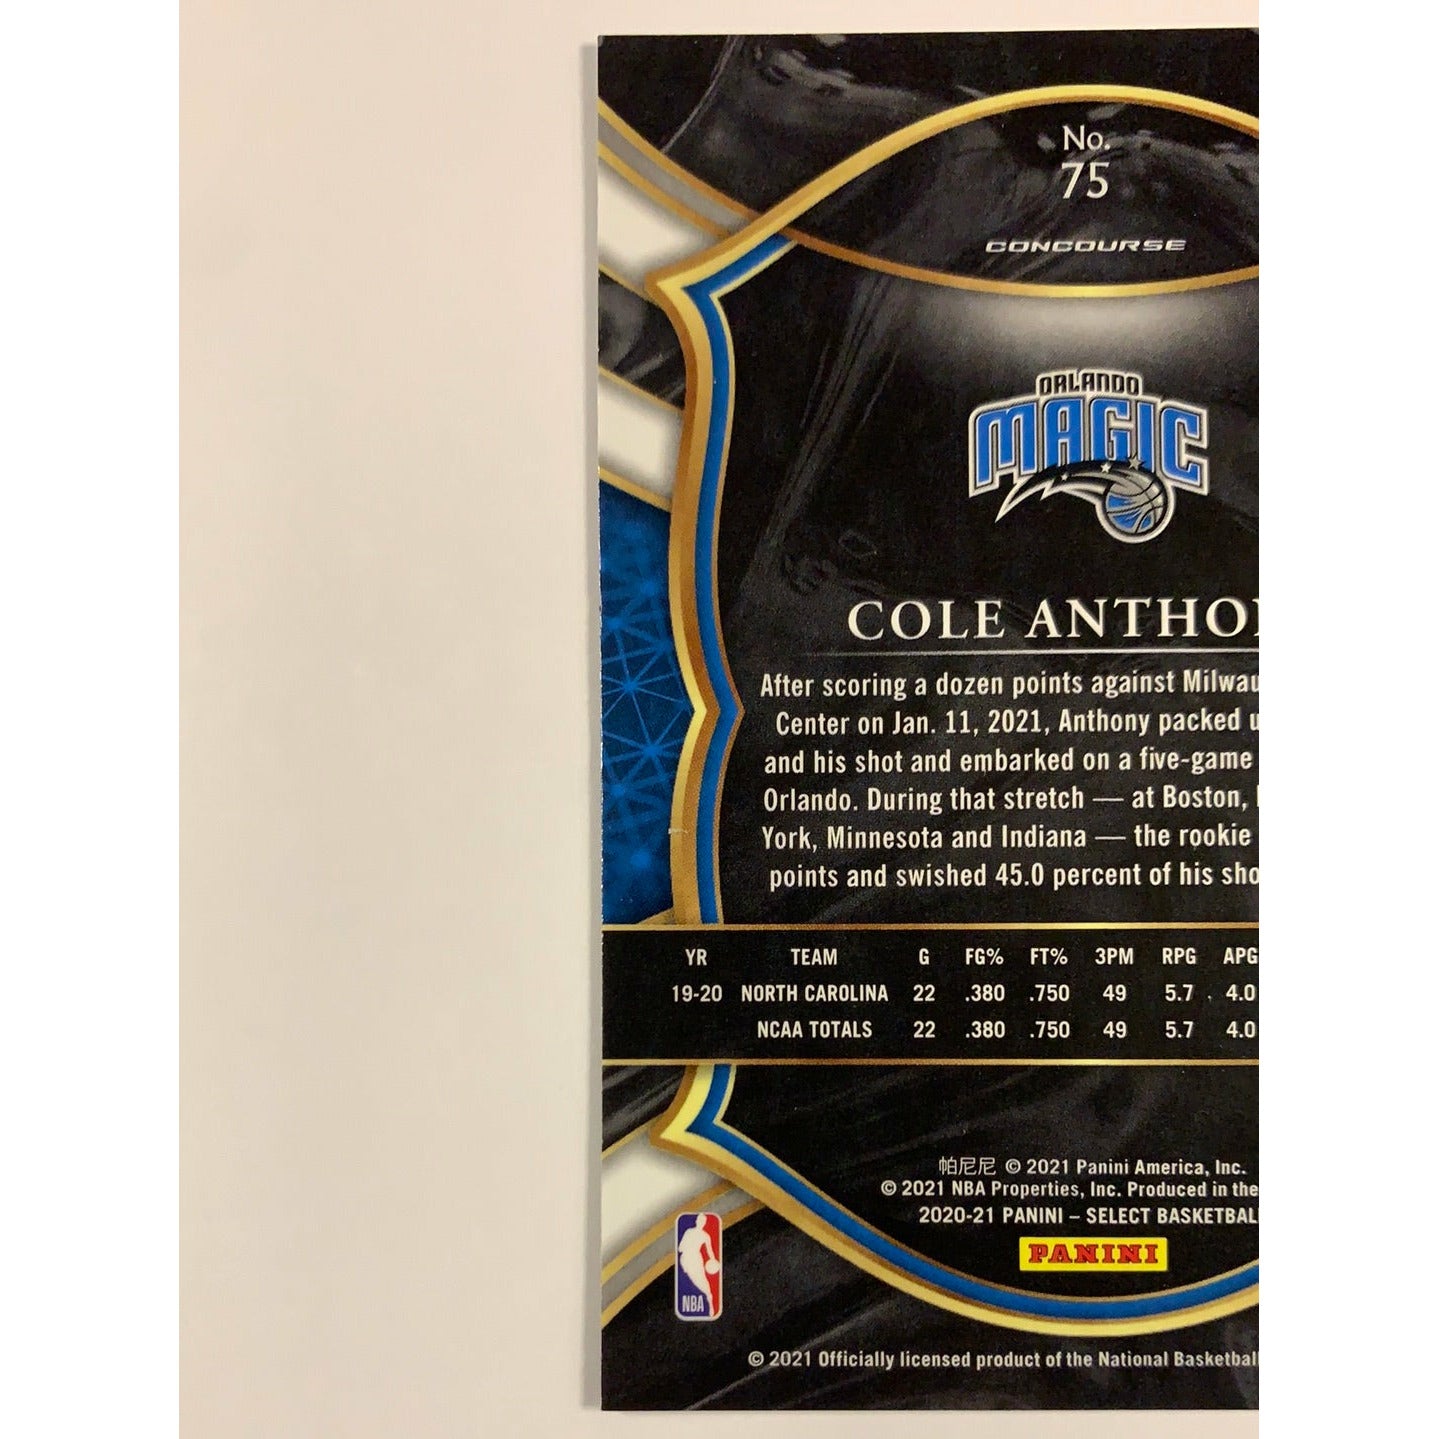 2020-21 Select Cole Anthony Blue Concourse Level RC